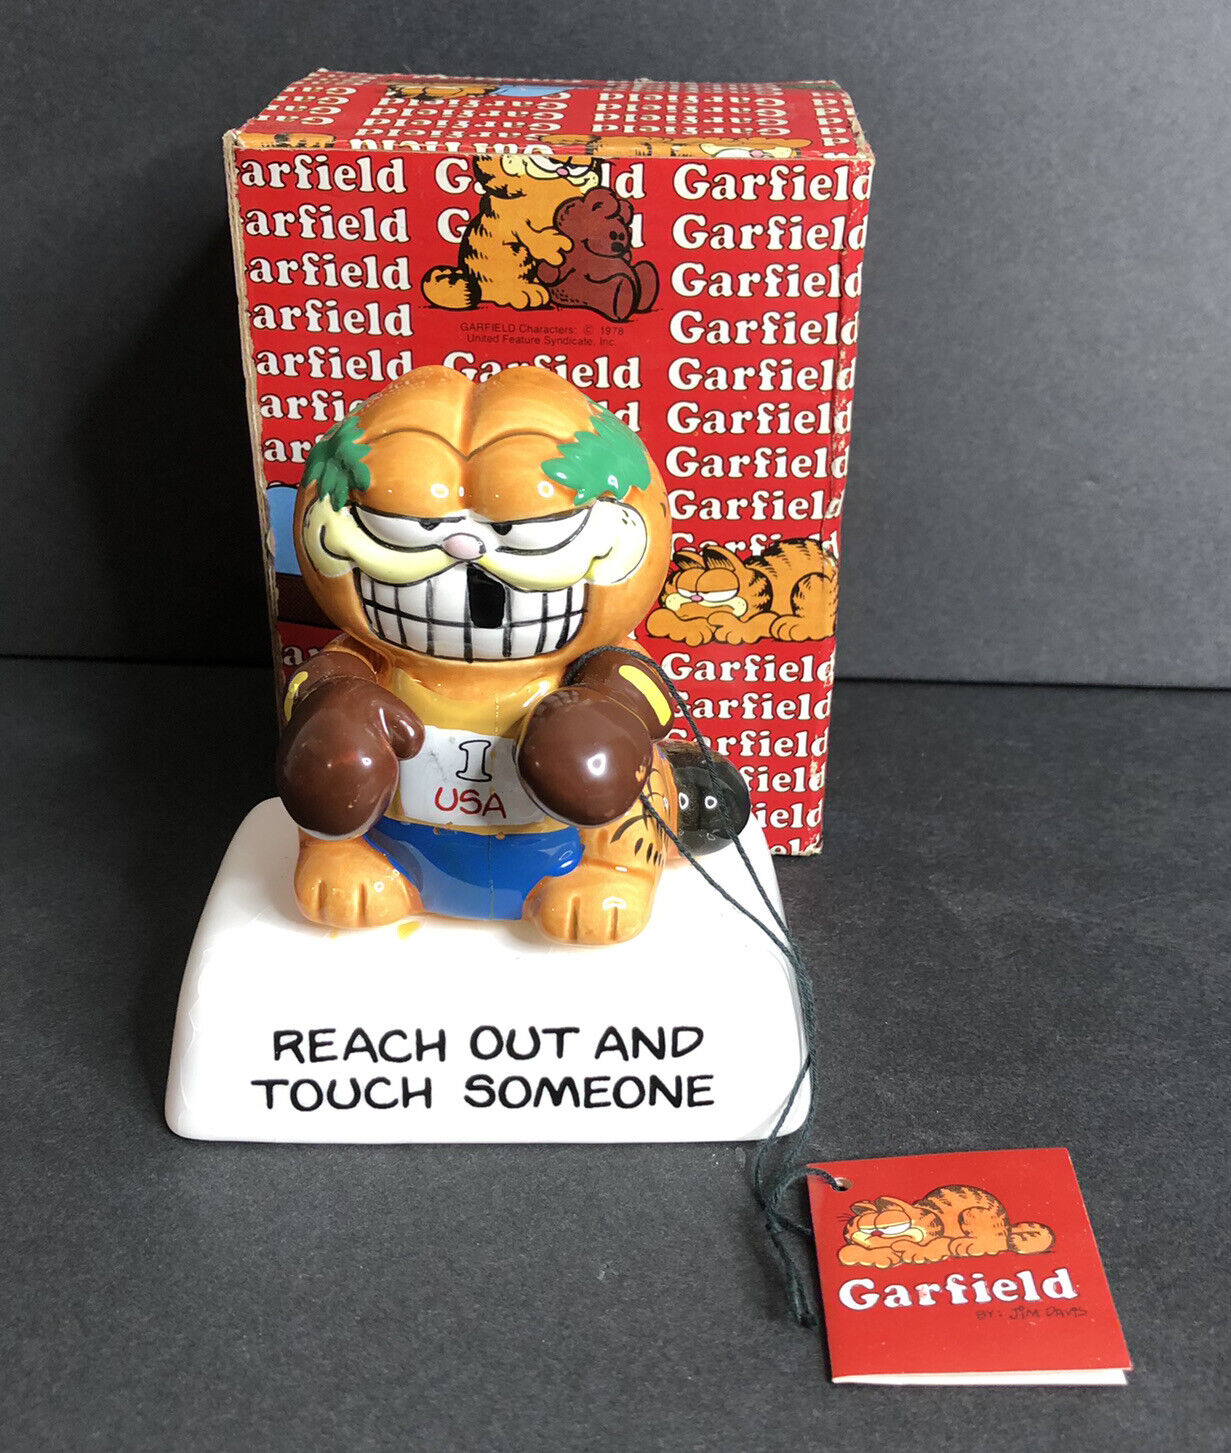 Enesco Garfield Boxing Figurine Olympic Reach Out and Touch Someone READ